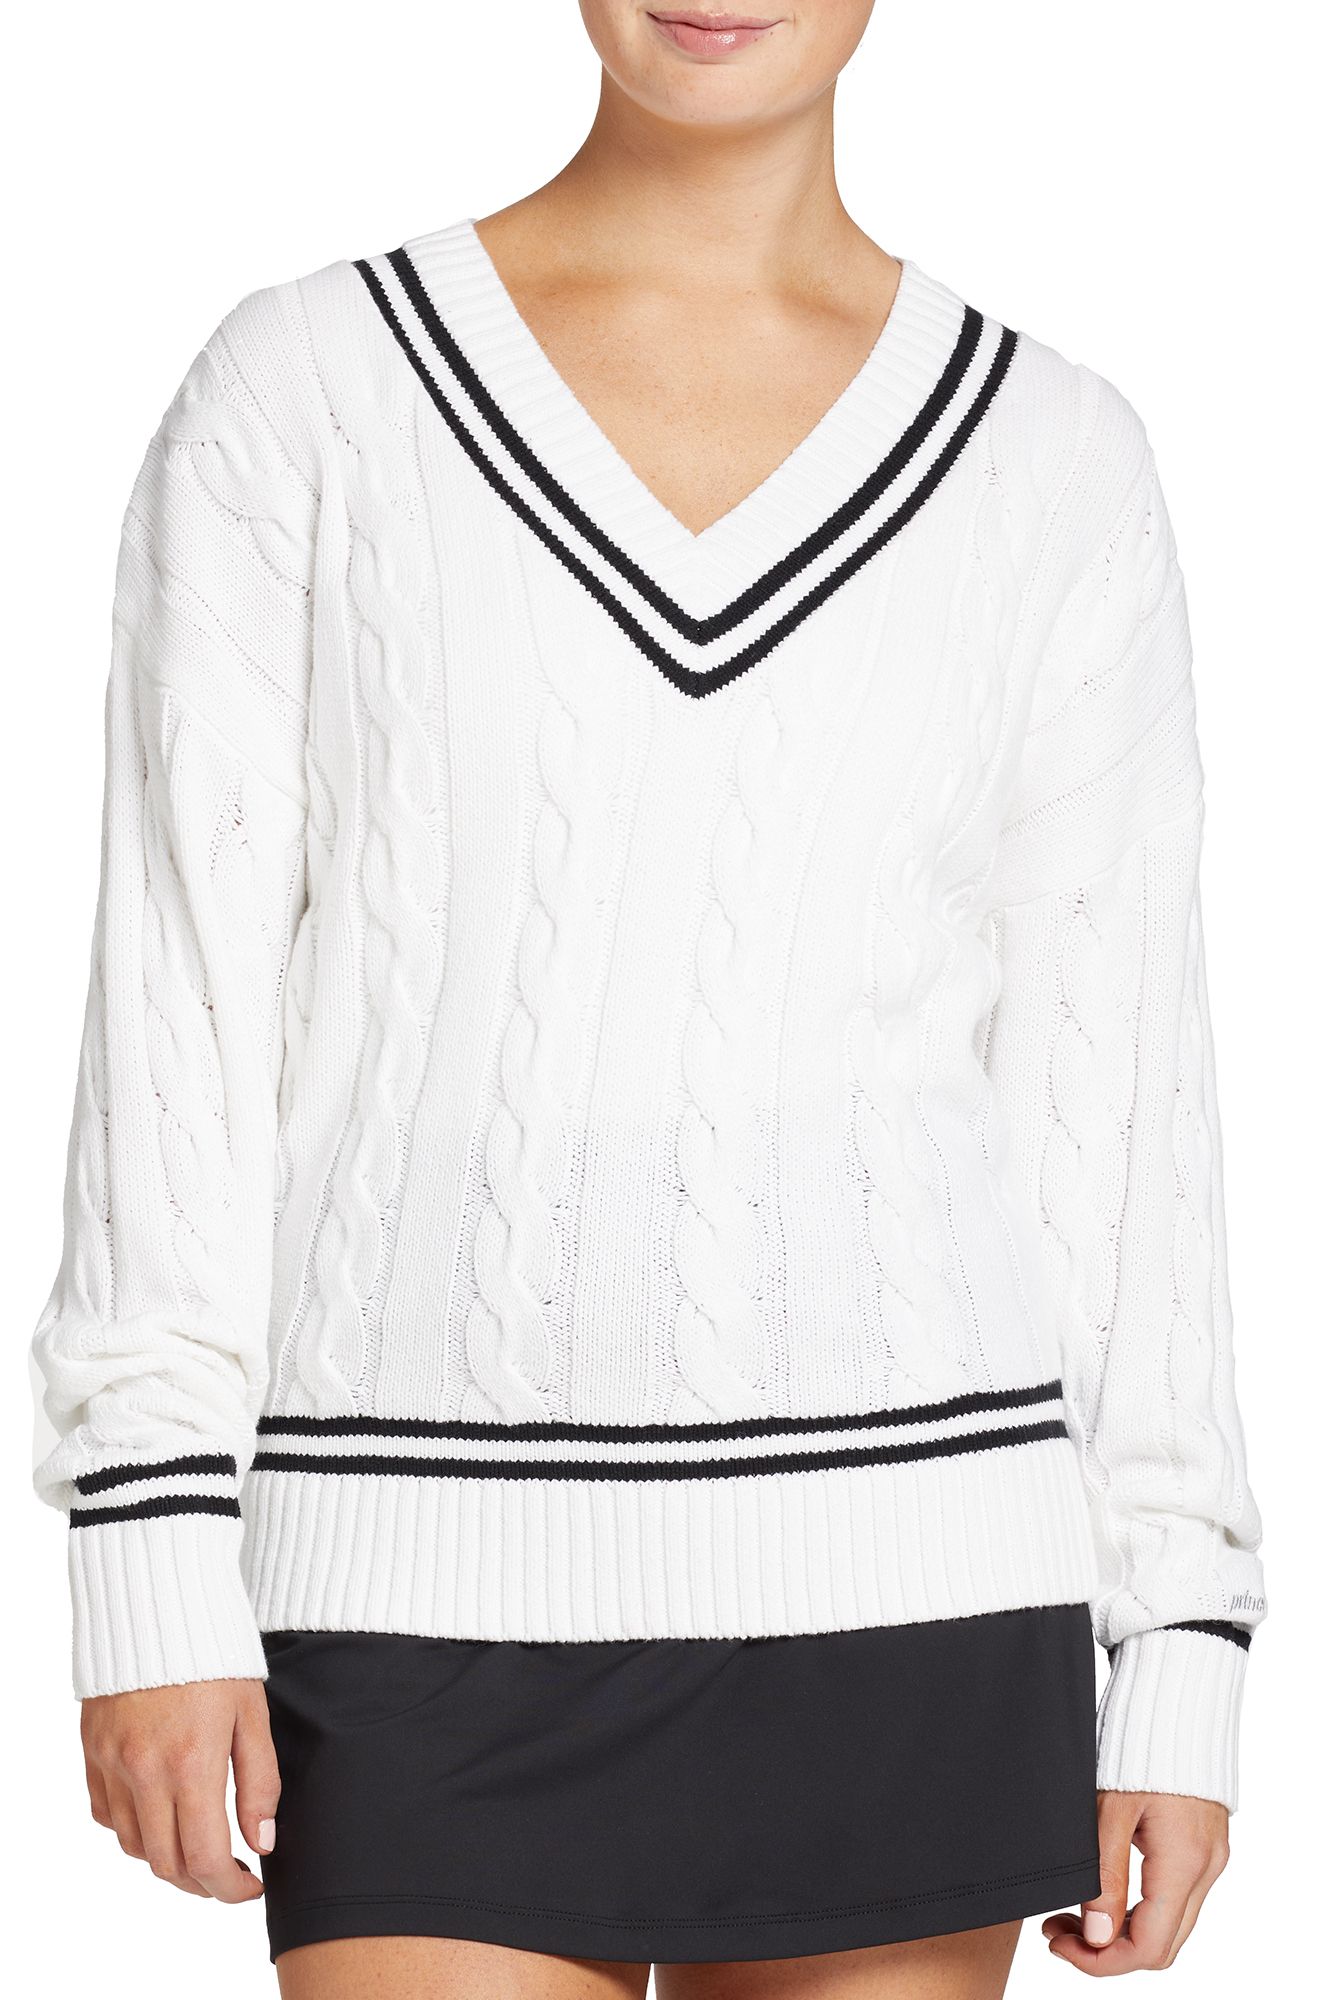 Prince Women's Classic Cable Knit Tennis Sweater